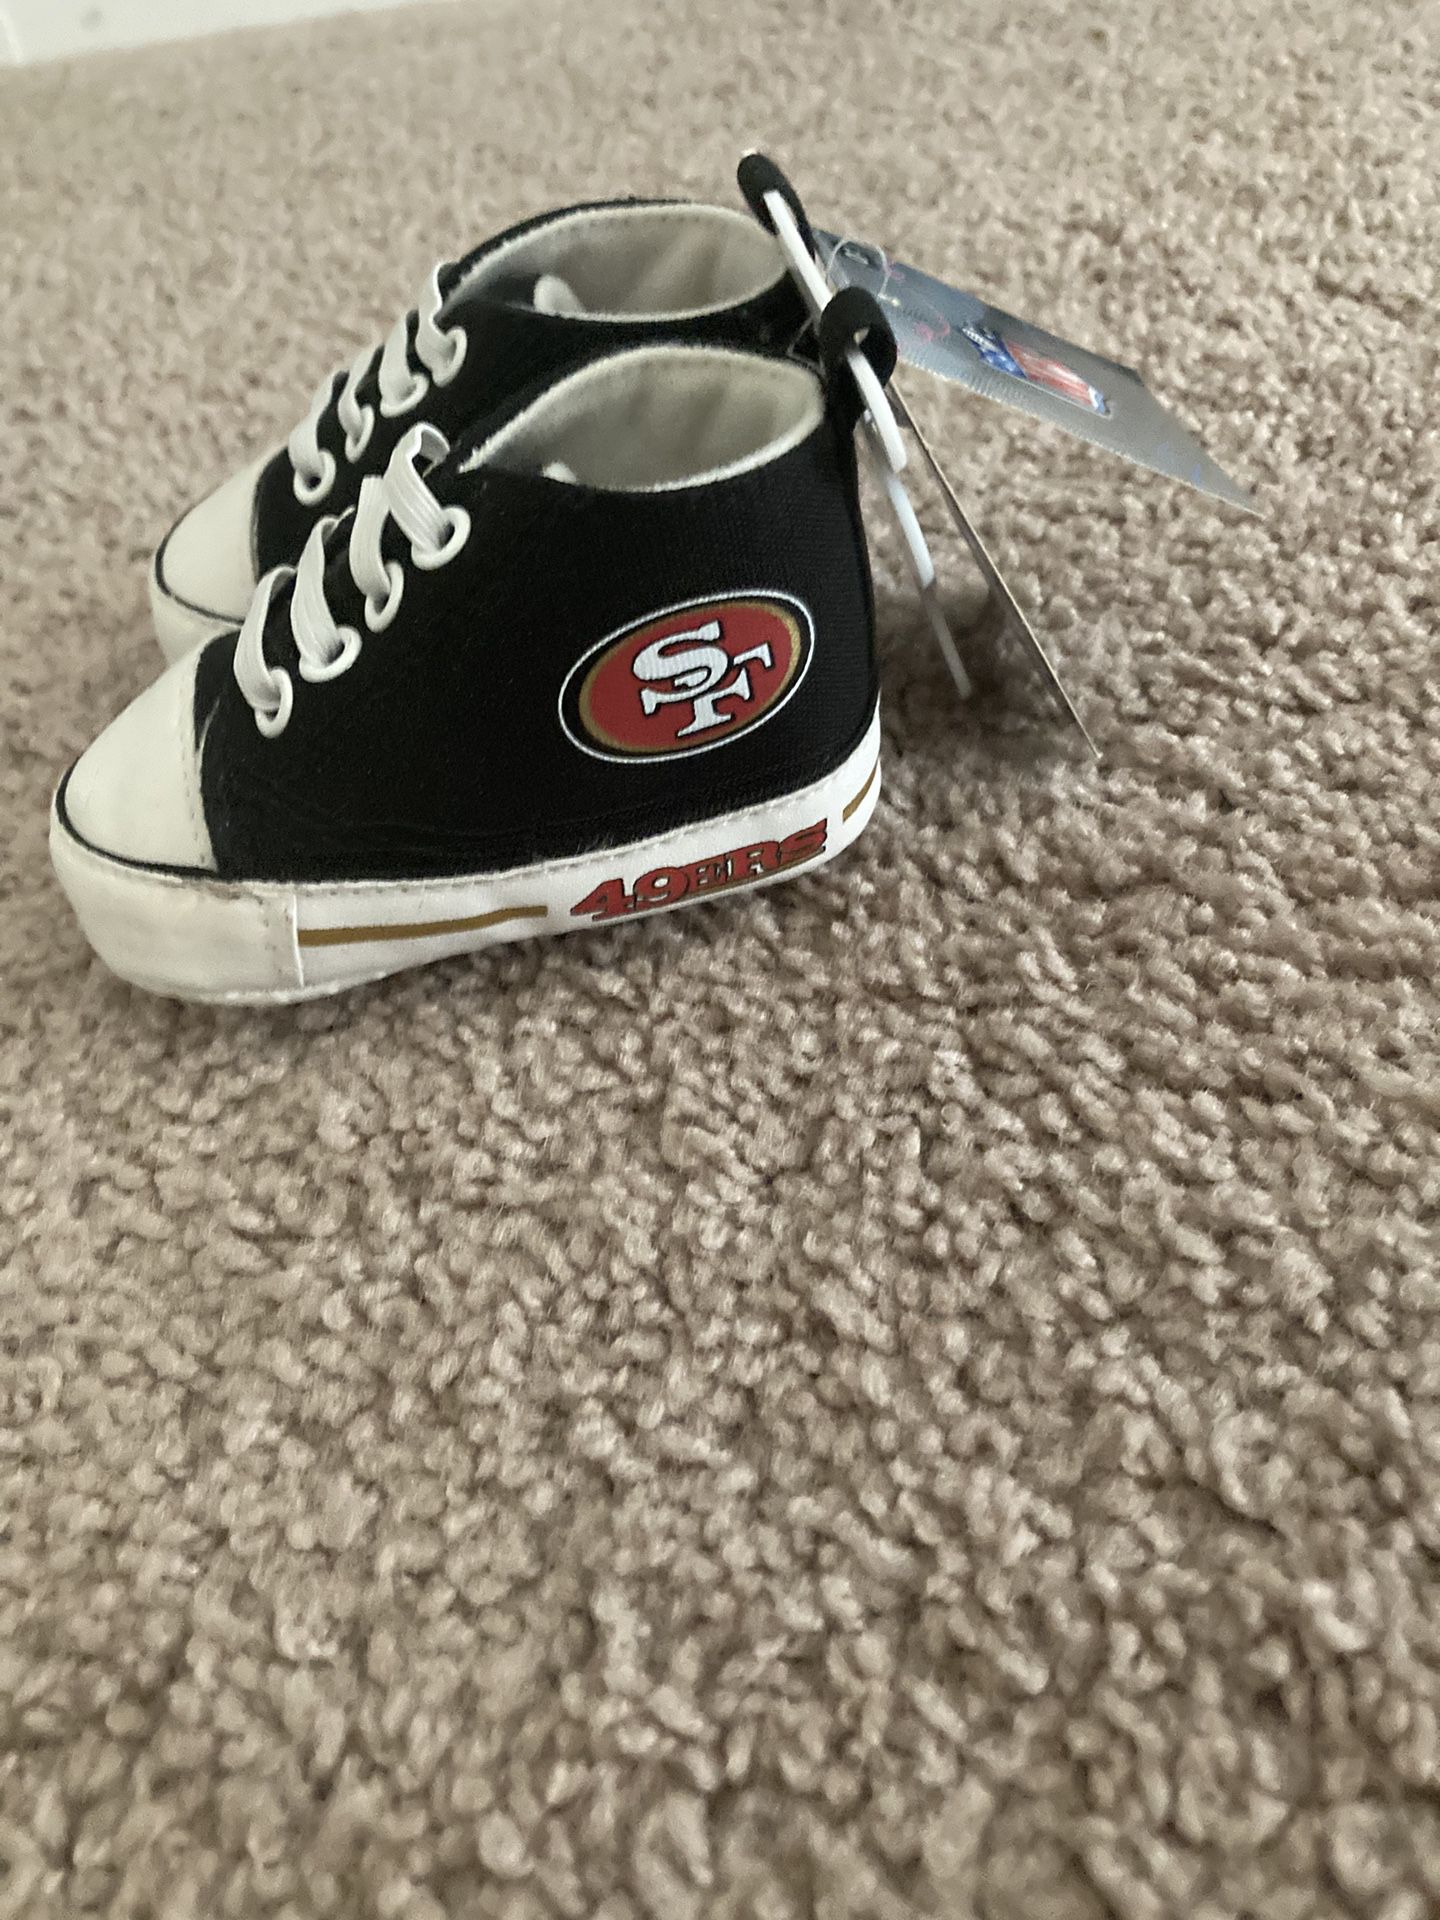 49ers Baby Shoes New